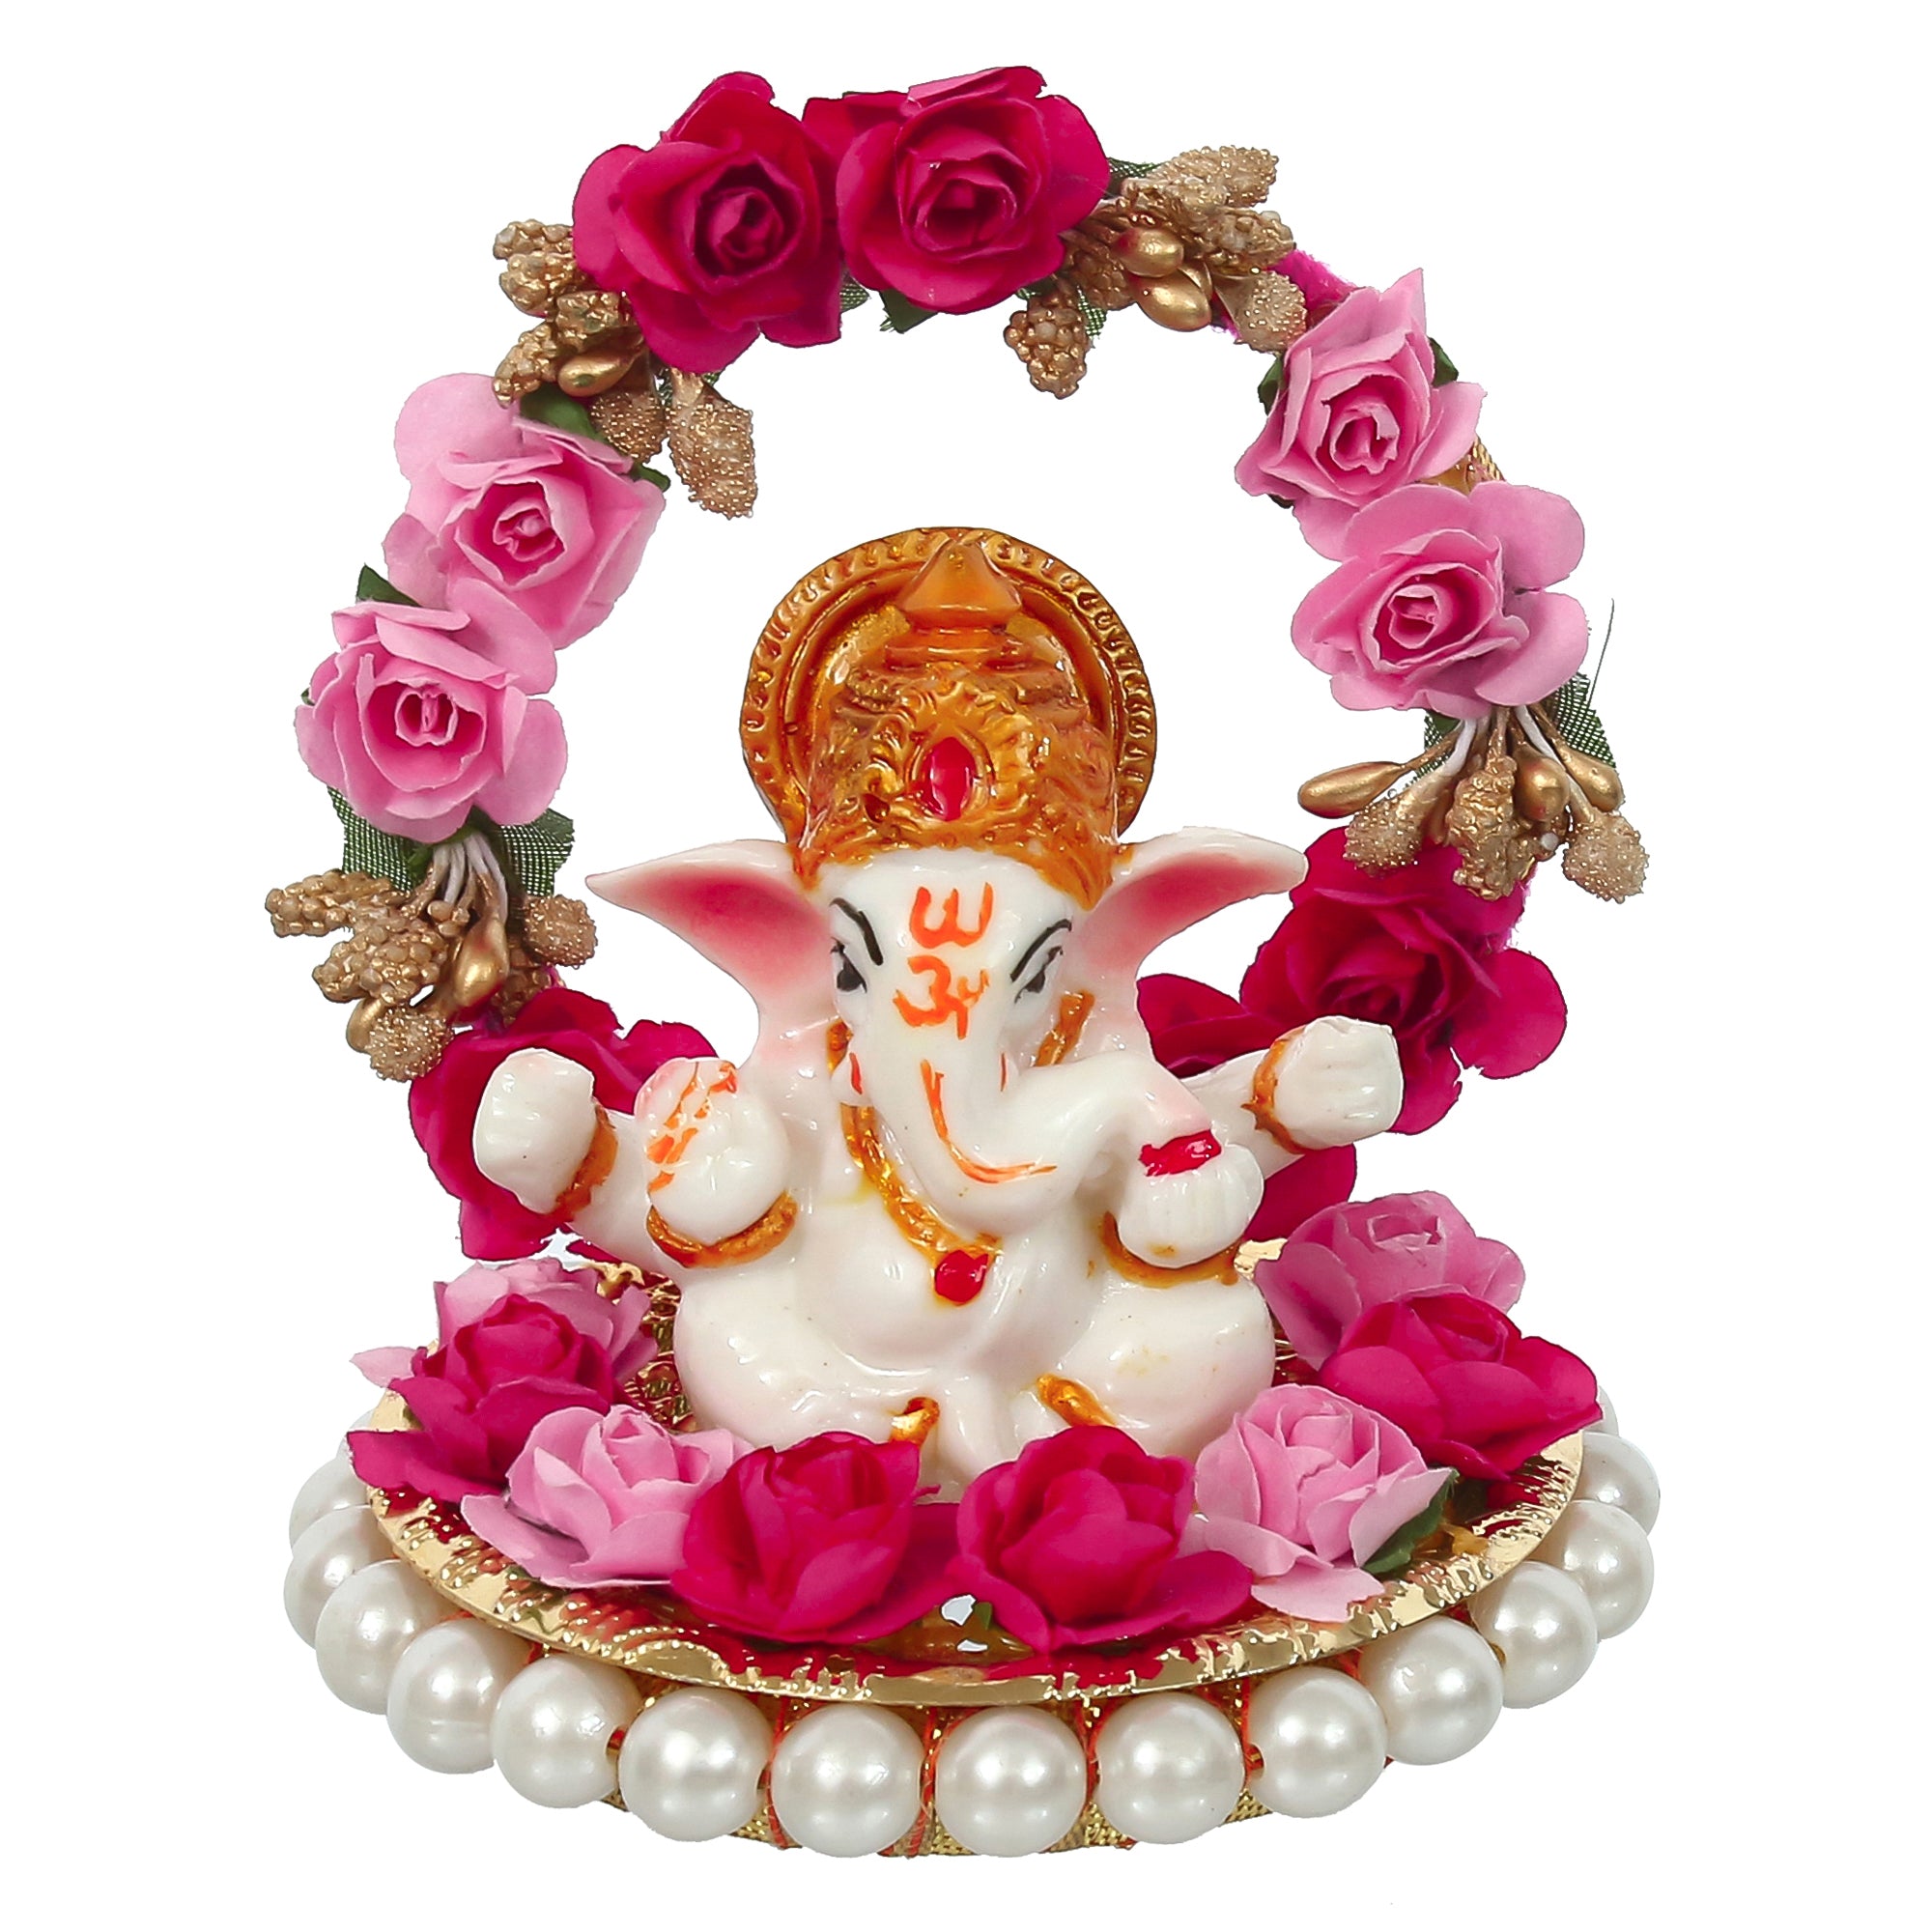 Polyresin Lord Ganesha Idol on Decorative Handcrafted Plate with Throne of Pink and Red Flowers 2